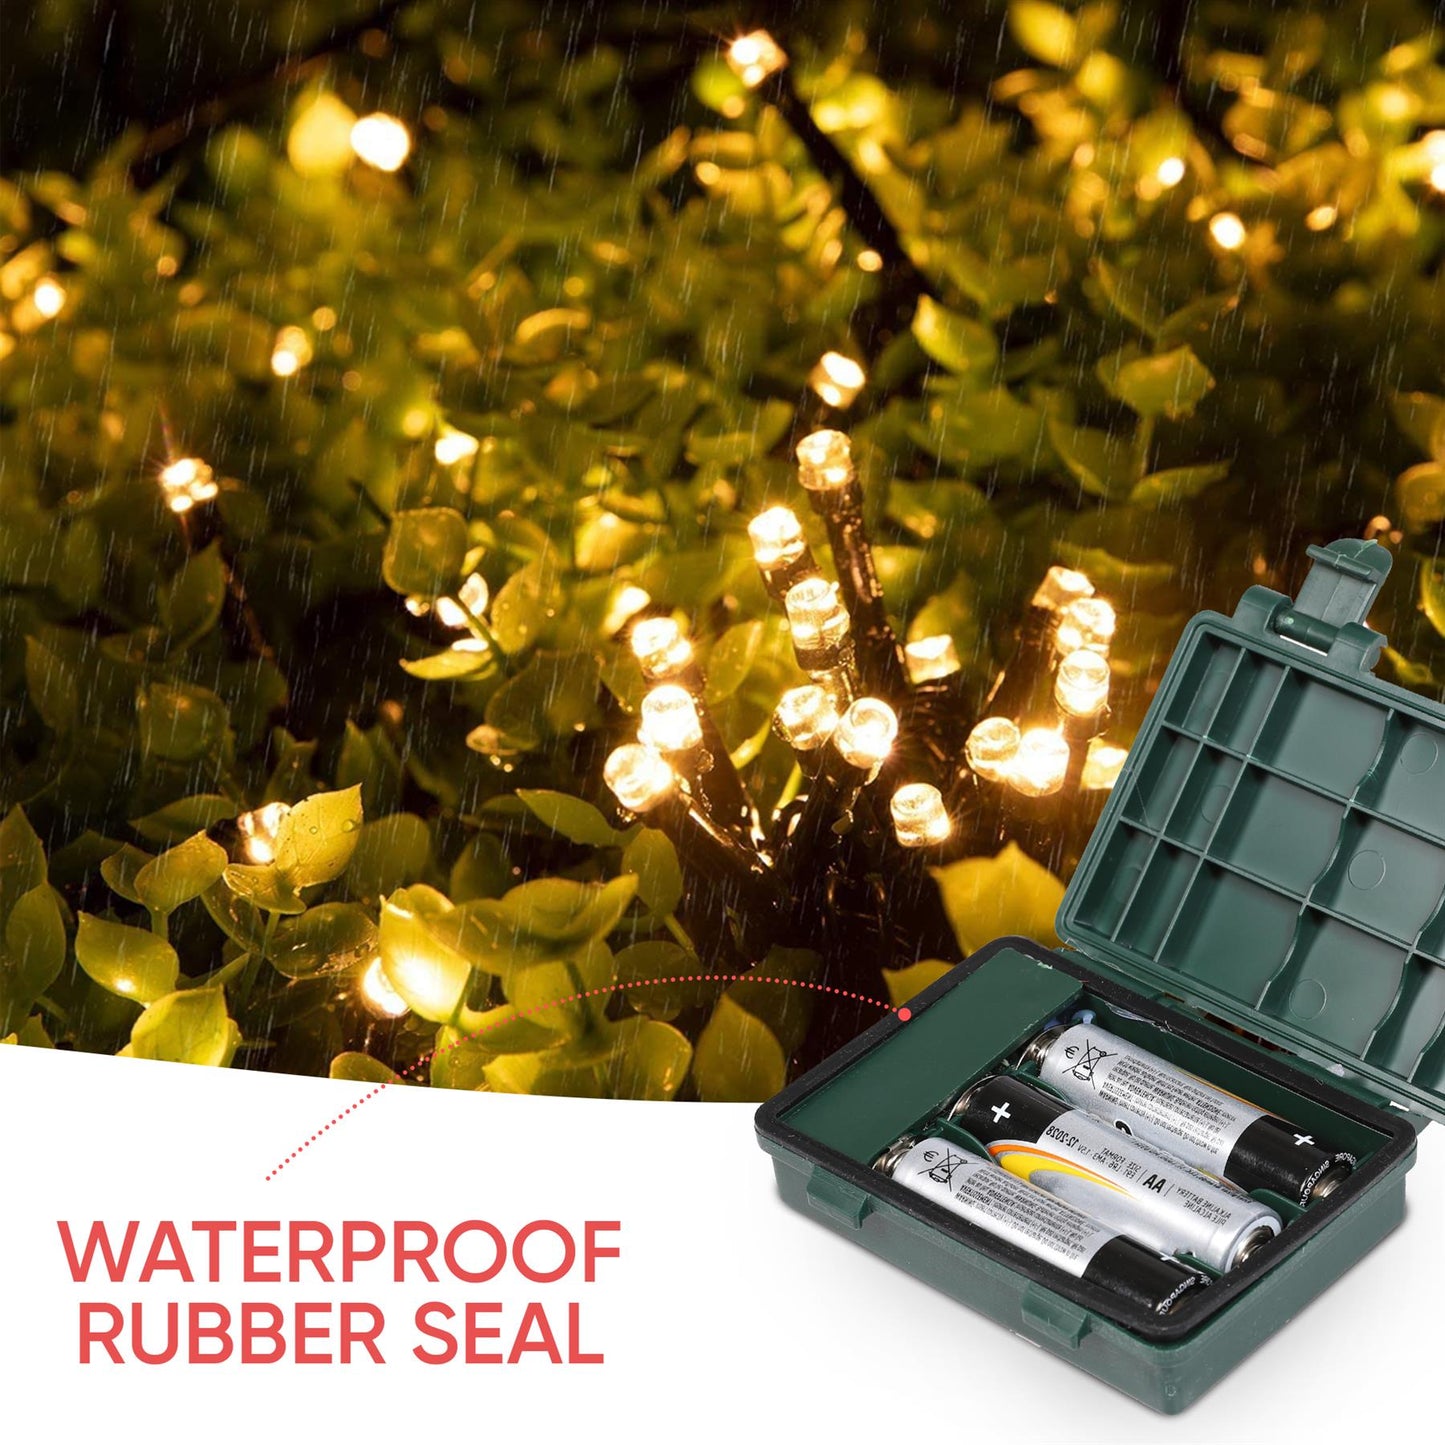 Light Up Your Nights with Battery-Operated Outdoor LED Lights